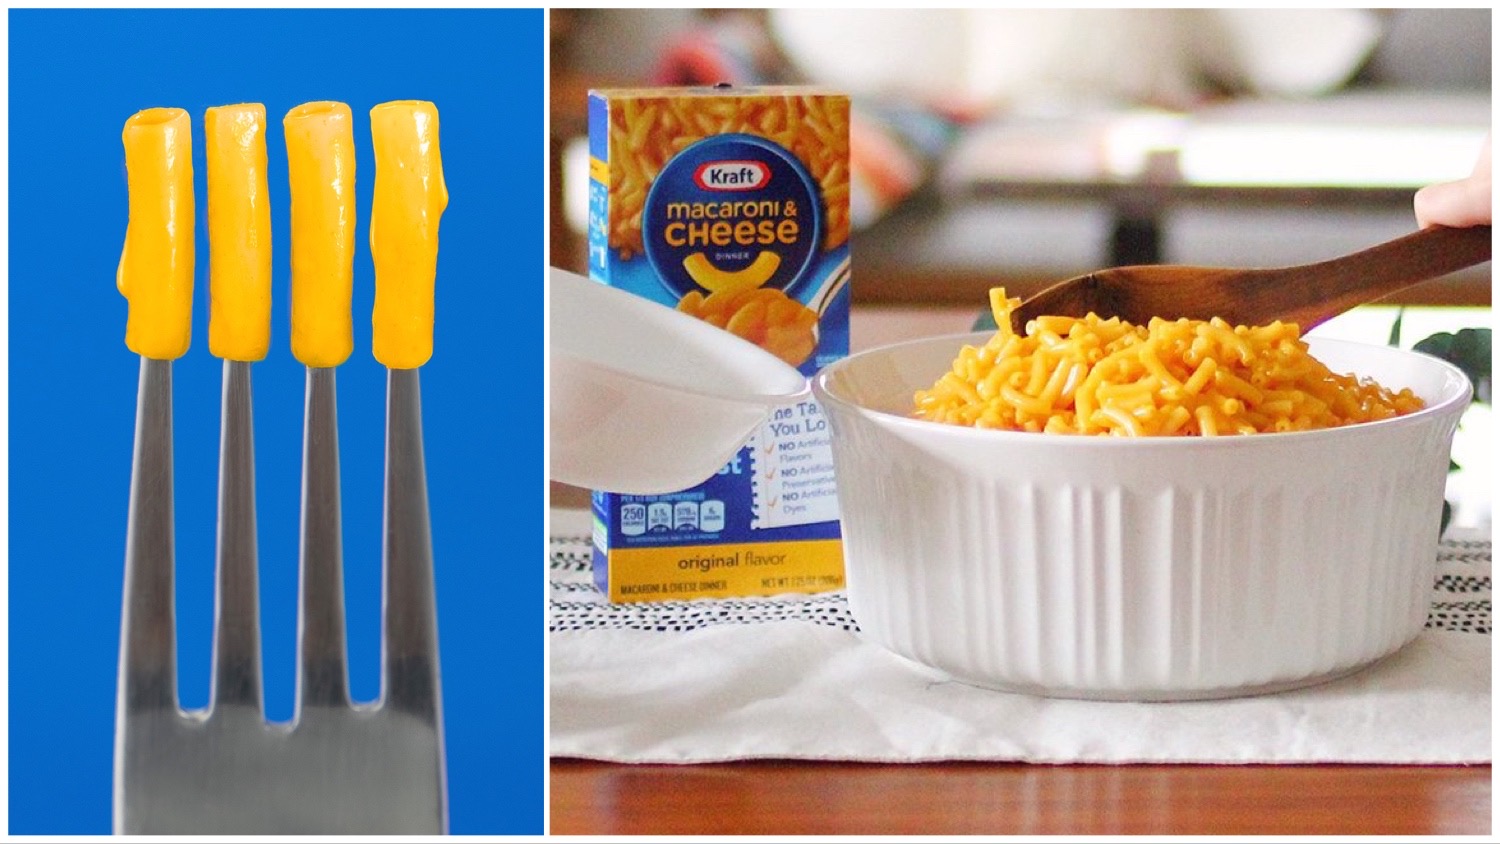 Split image of Kraft logo featuring maceroni on a fork (left) and a box of the brand's vegan mac and cheese next to a plated up serving (right).